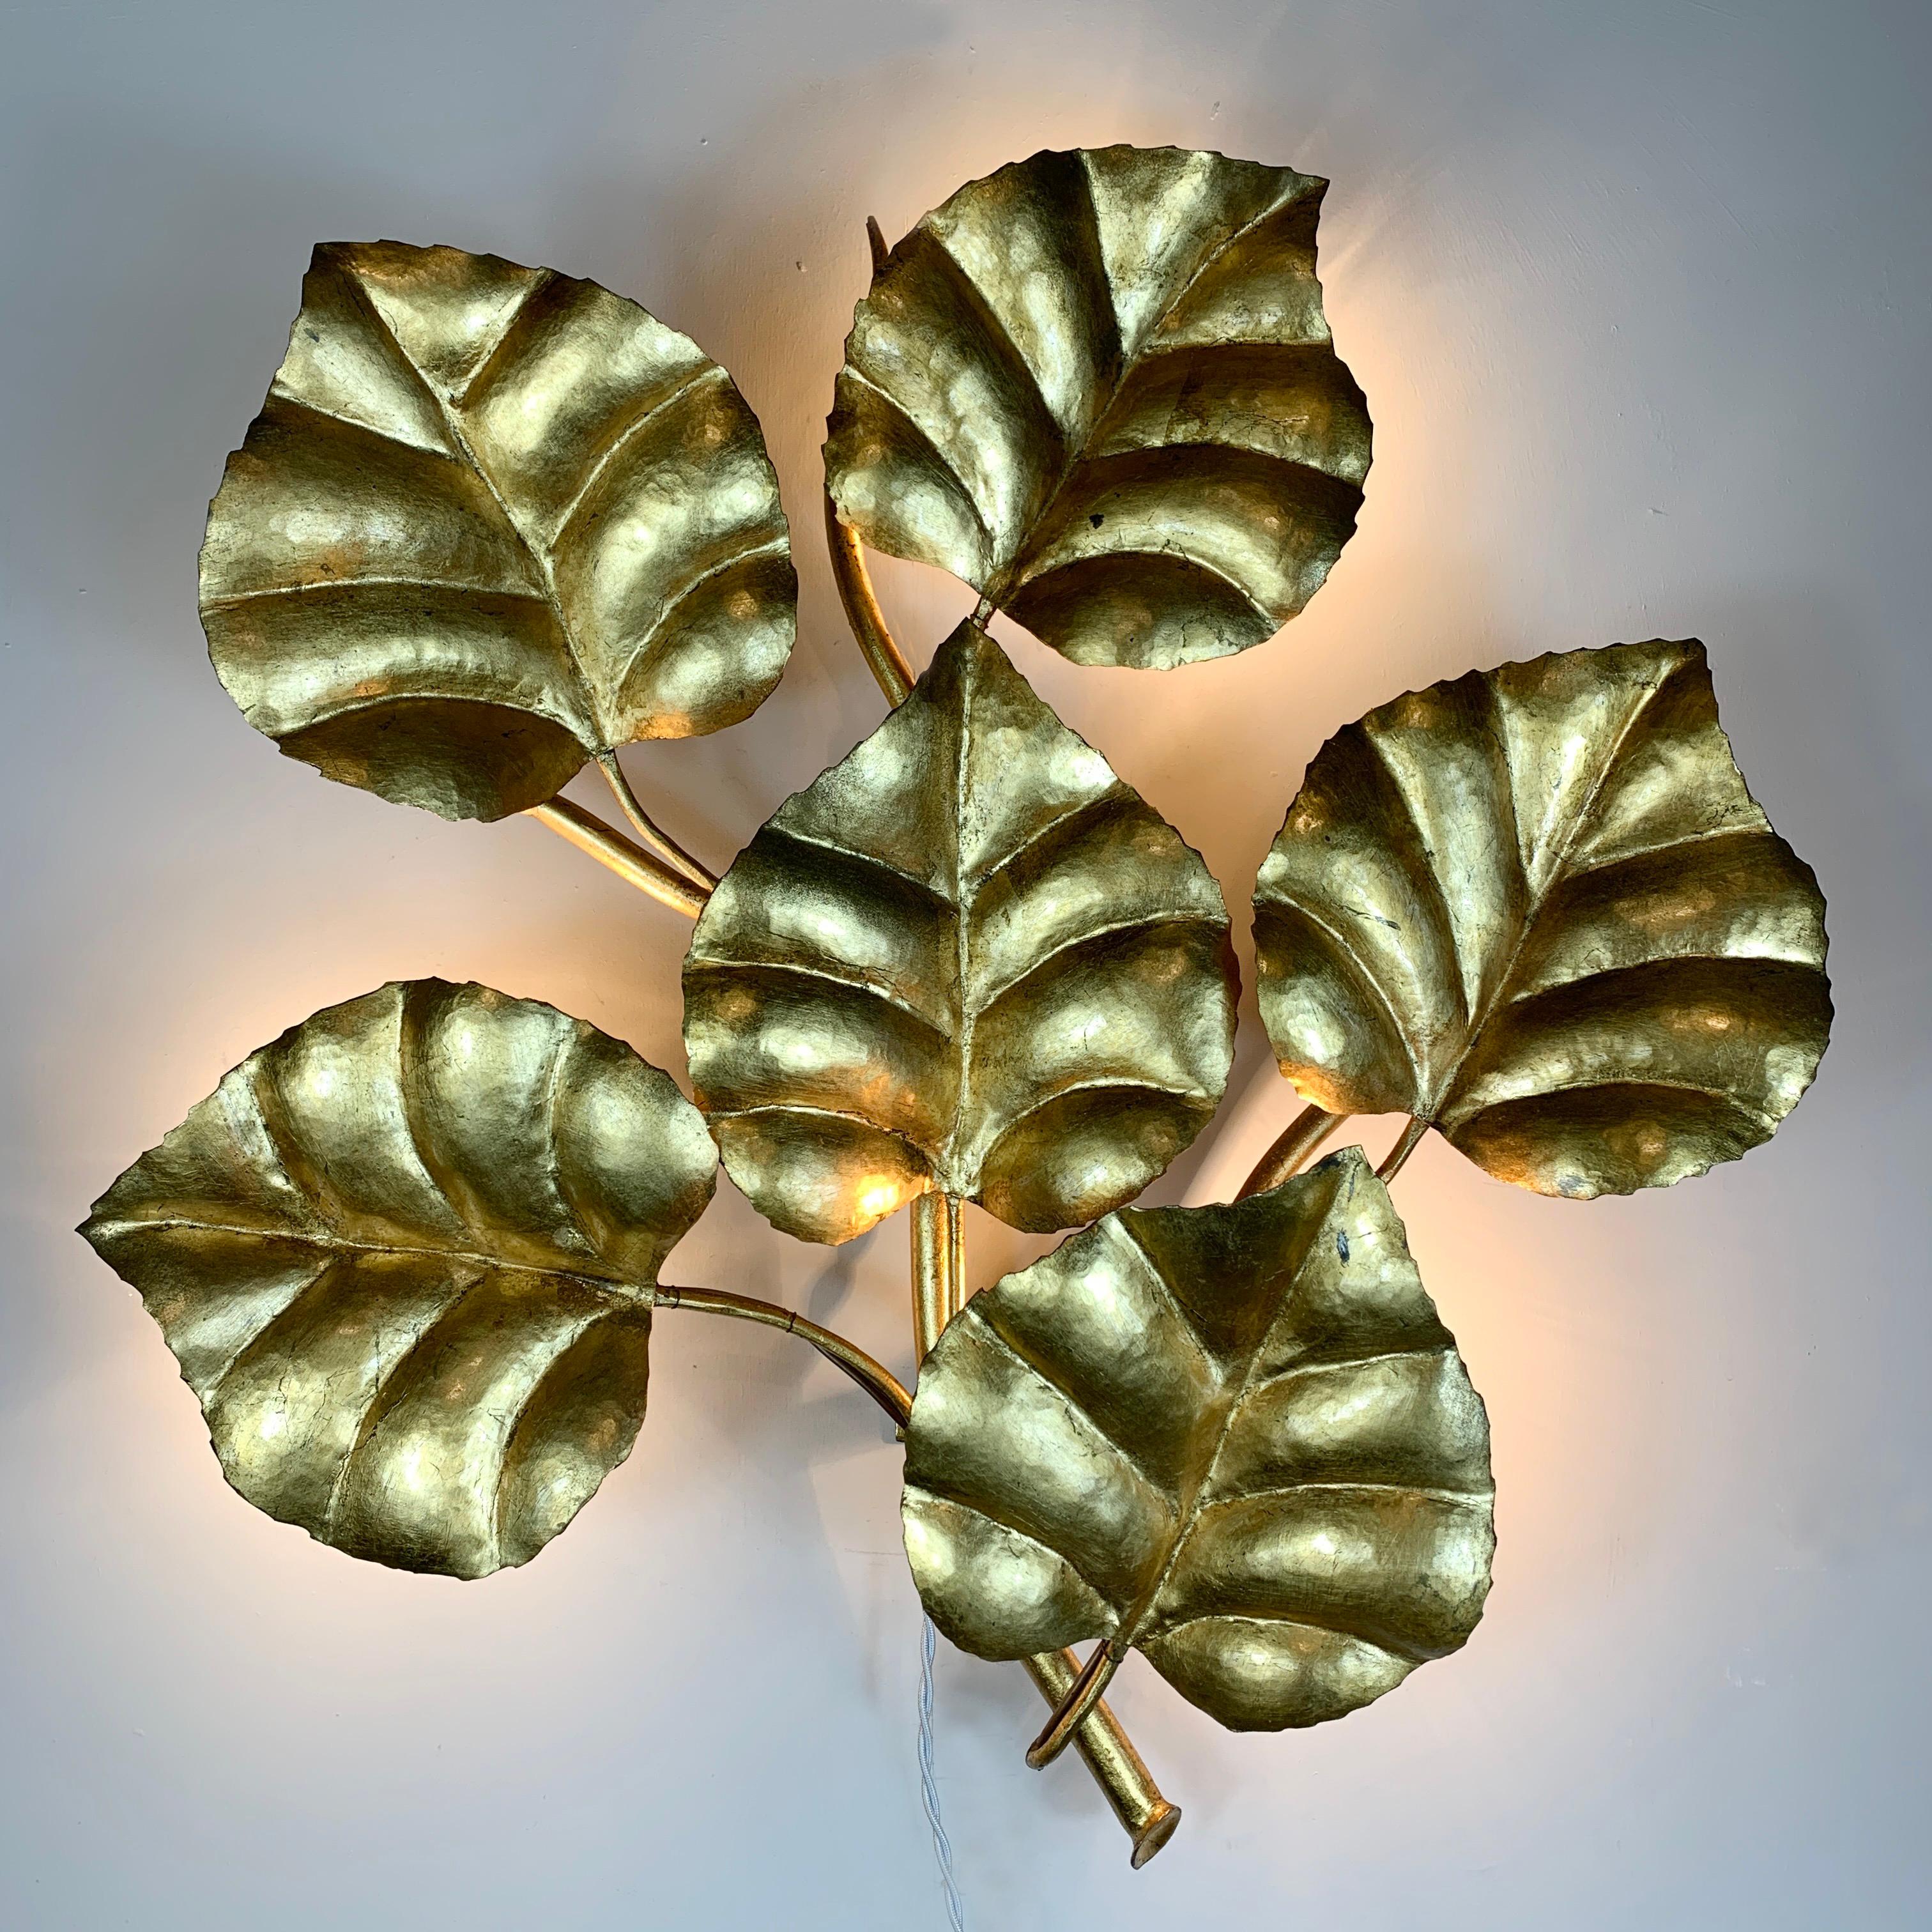 Large Gilt Leaf Wall Sconce, Mid Century, France C 1960/70'S
Bright Original Gilt Finish

57cm Height, 53.5cm Width, 14cm Depth

The Lamp Takes 3 E14 Bulbs, Hidden Behind The Leaves
There Is A Hanging Hook To The Back Of The Fitting

THE LIGHT IS